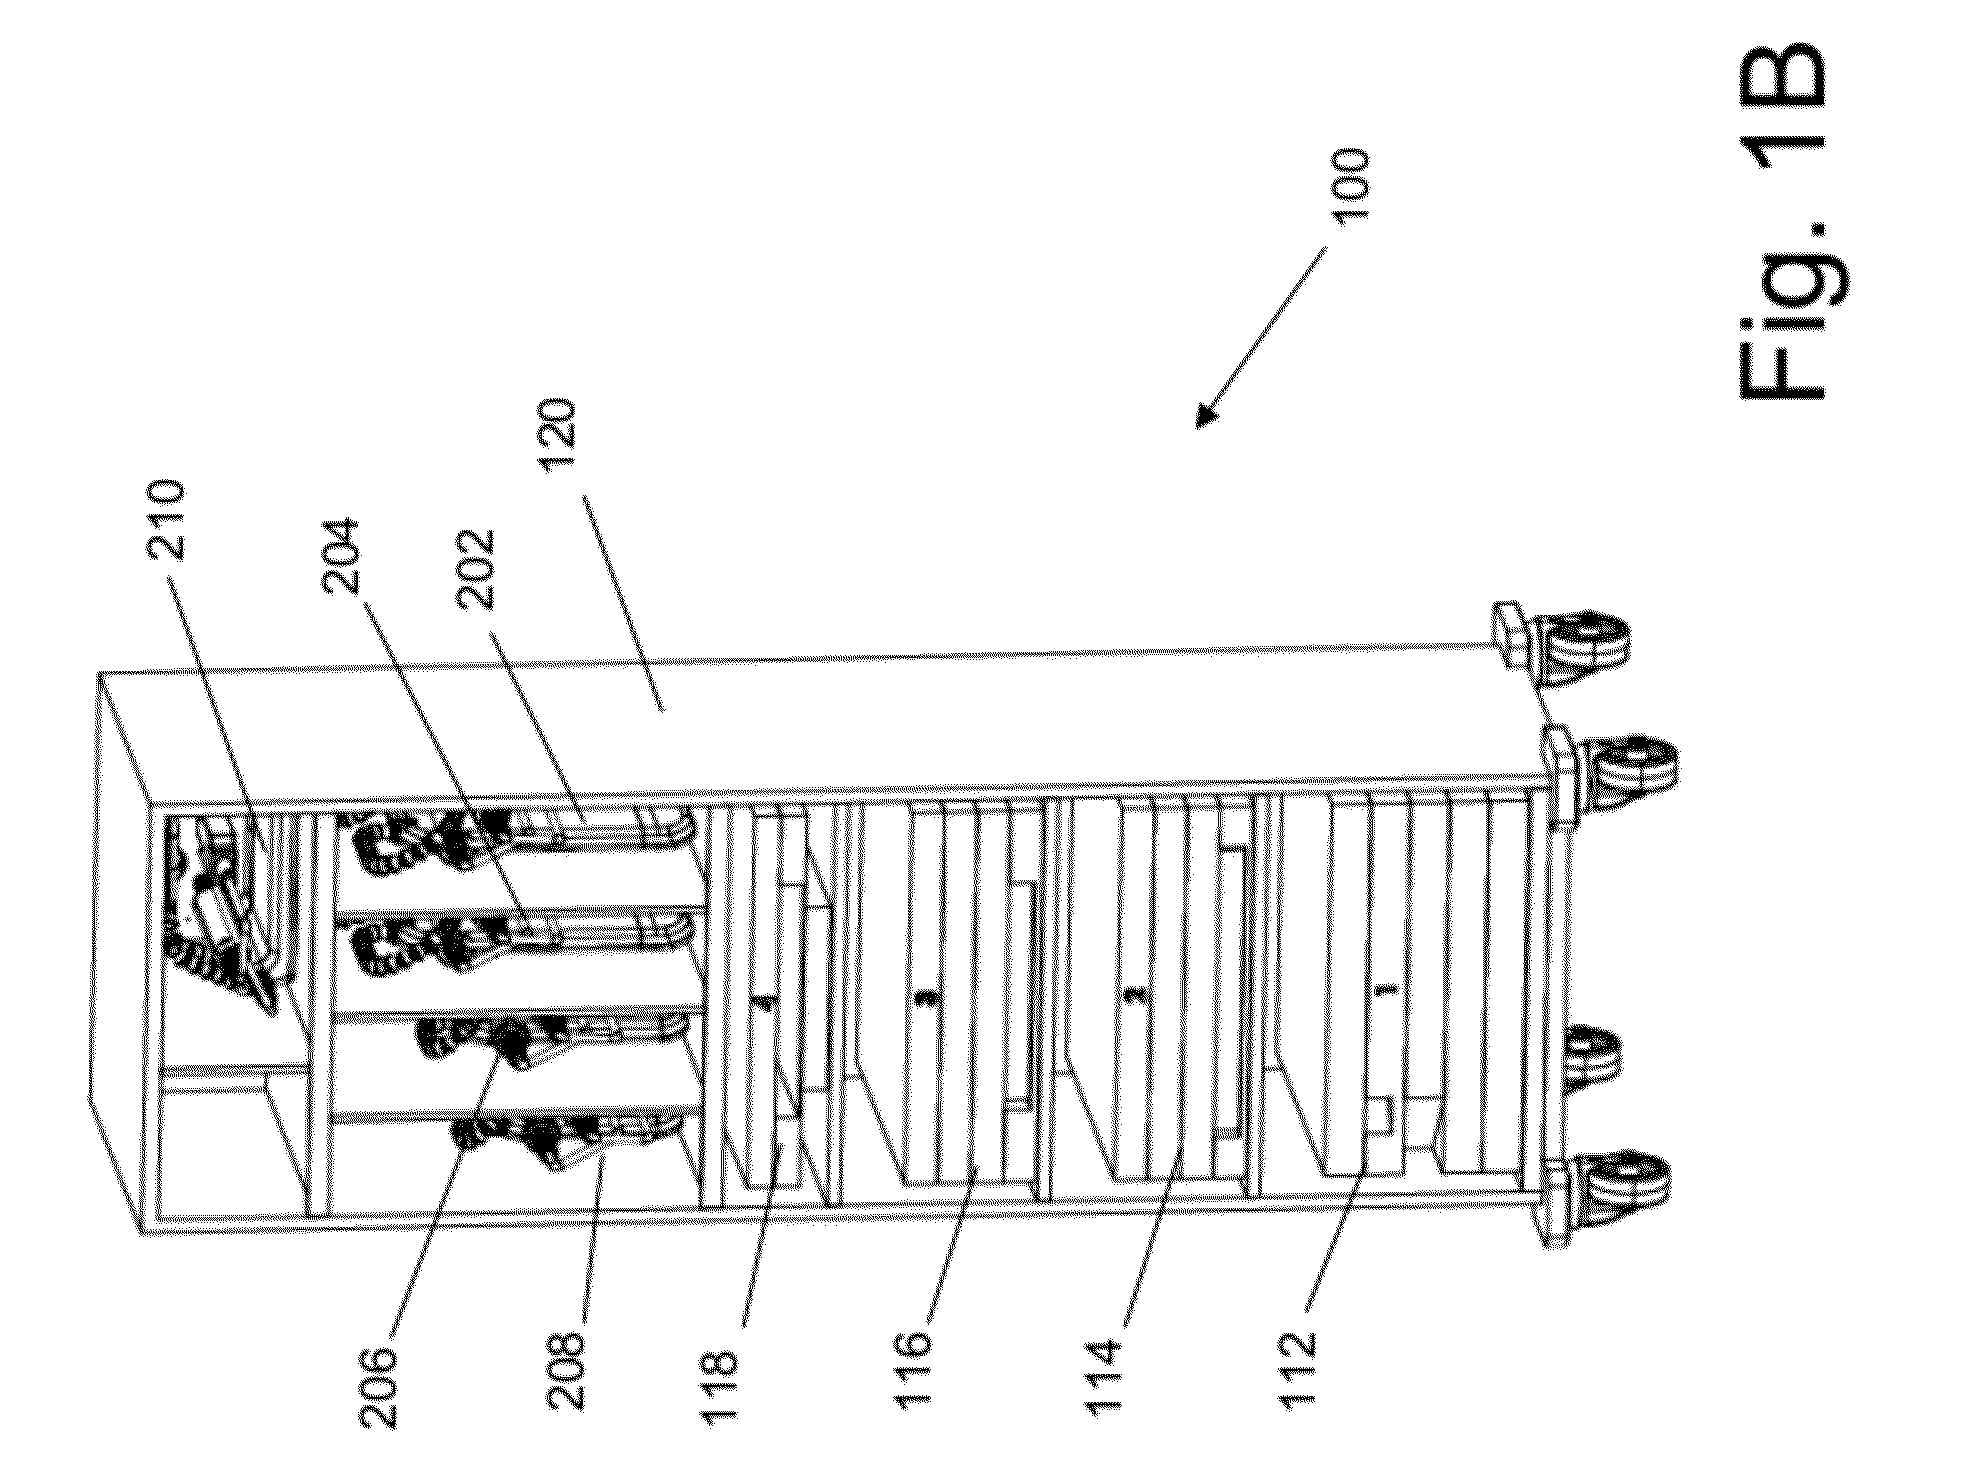 System of receive coils and pads for use with magnetic resonance imaging